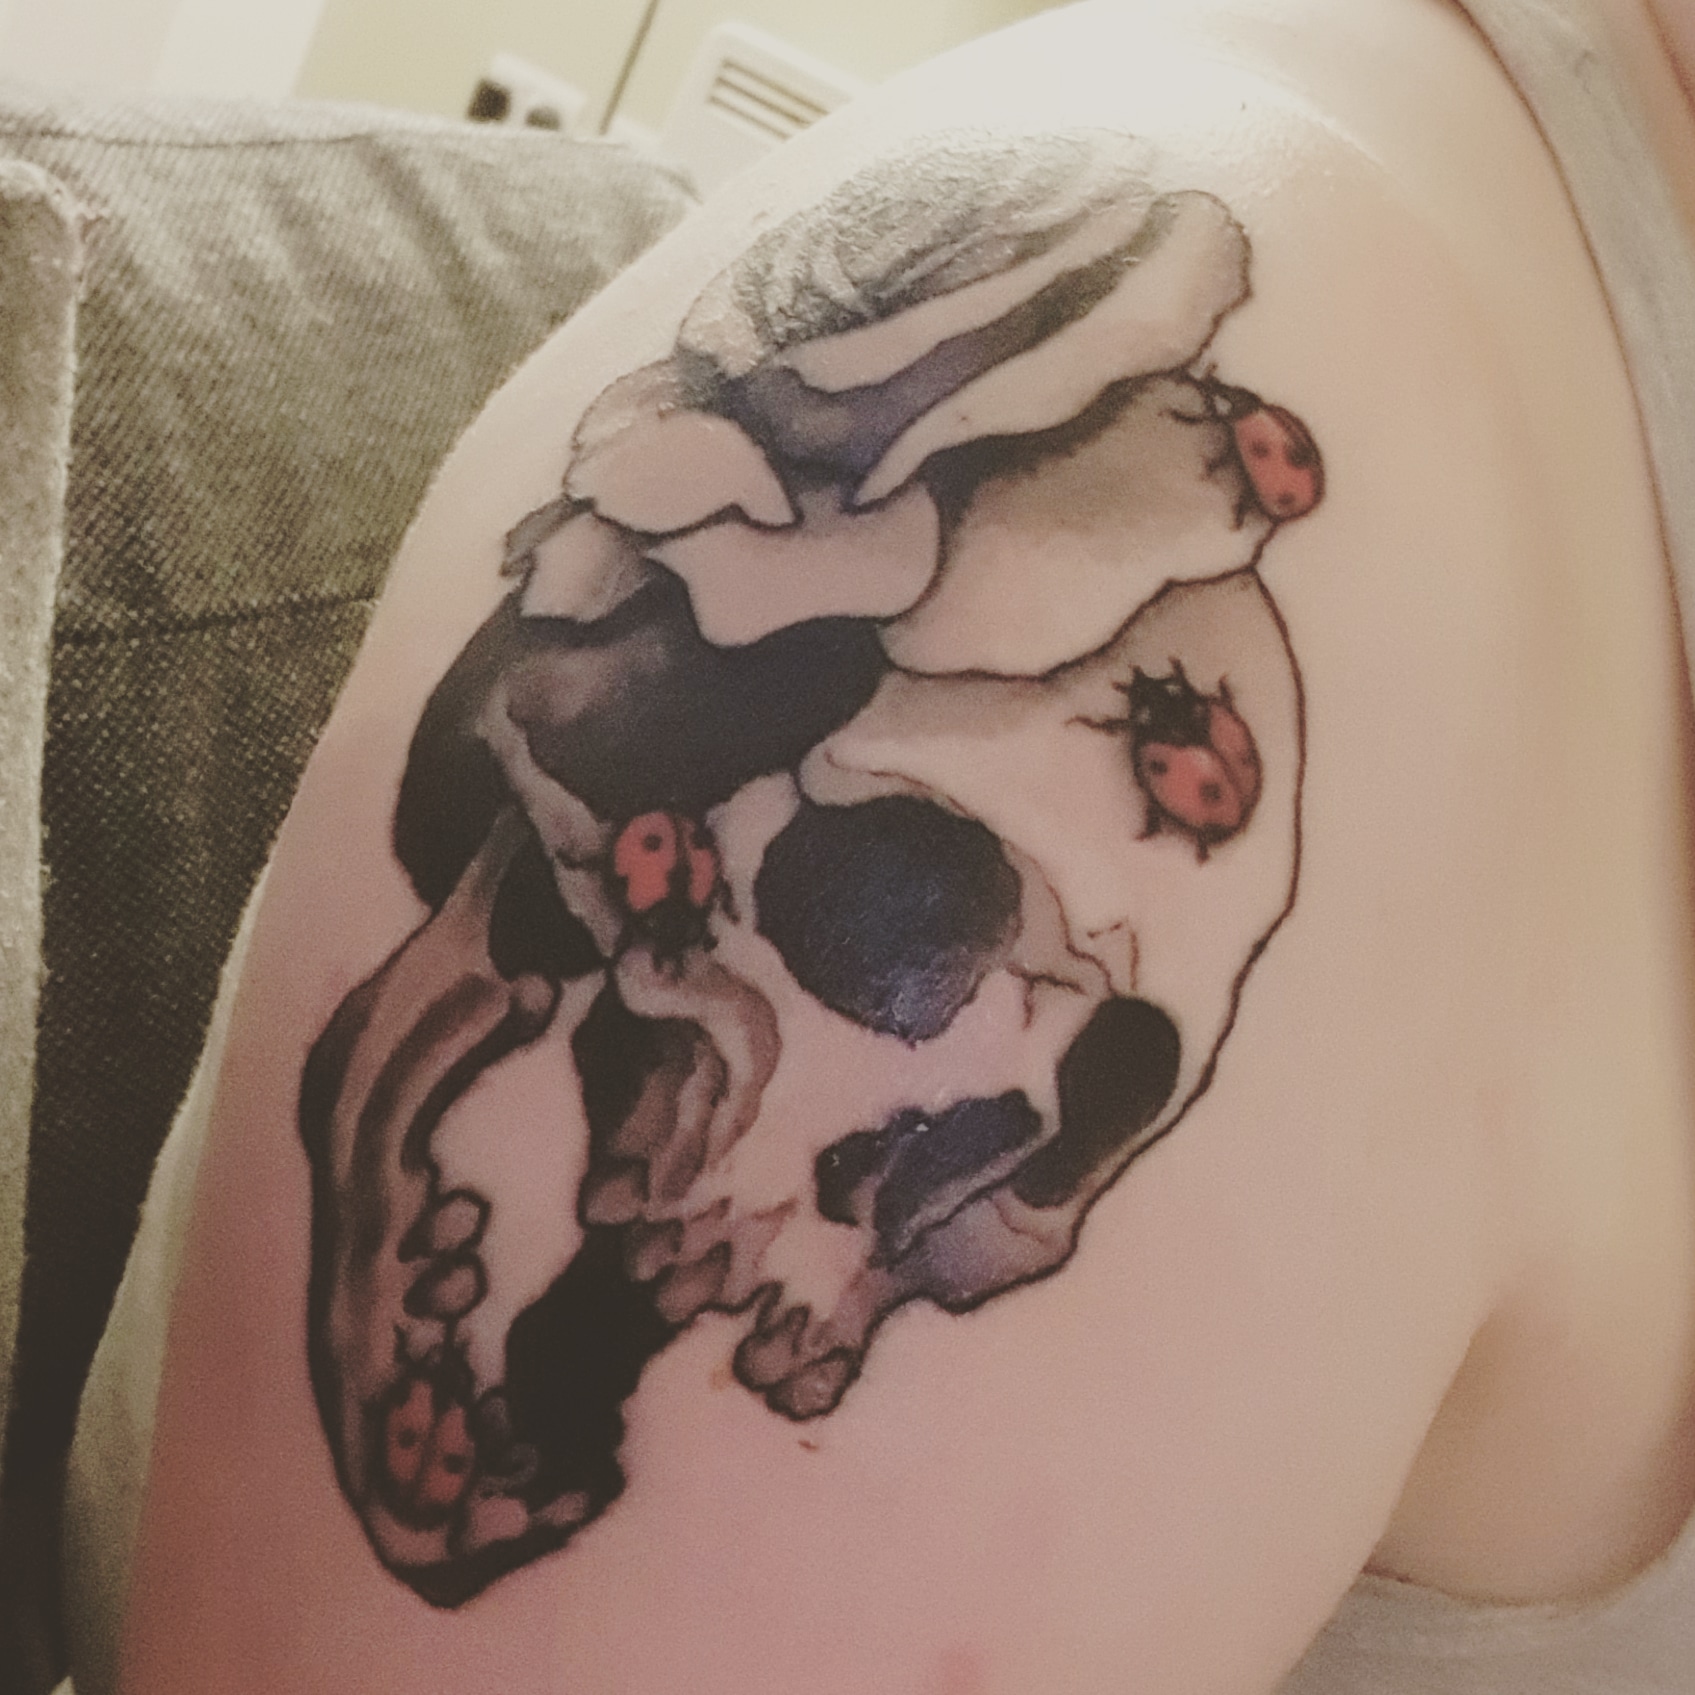 The black & white skull & rose, with 5 red ladybirds crawling over it, on my right shoulder.